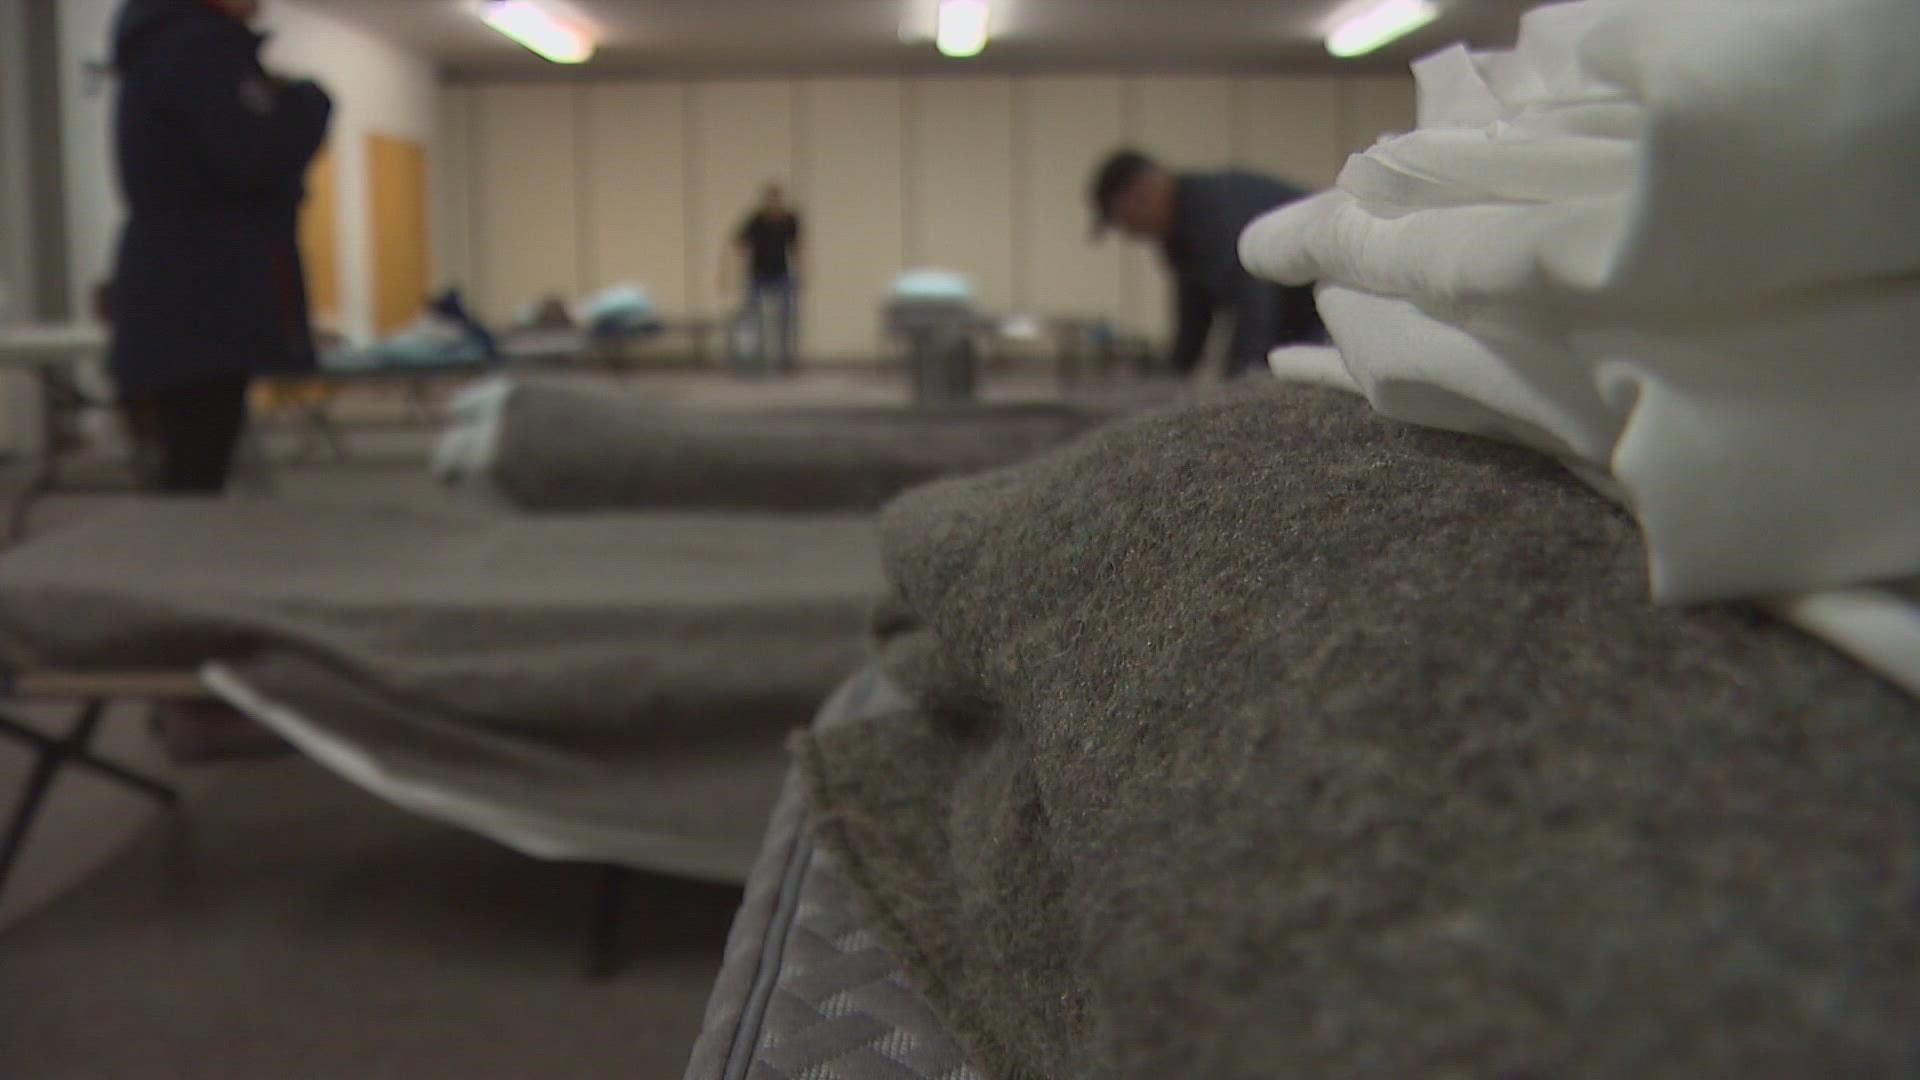 Bethlehem Lutheran Church in Marysville is seeing a record number of people in need of its cold-weather shelter.